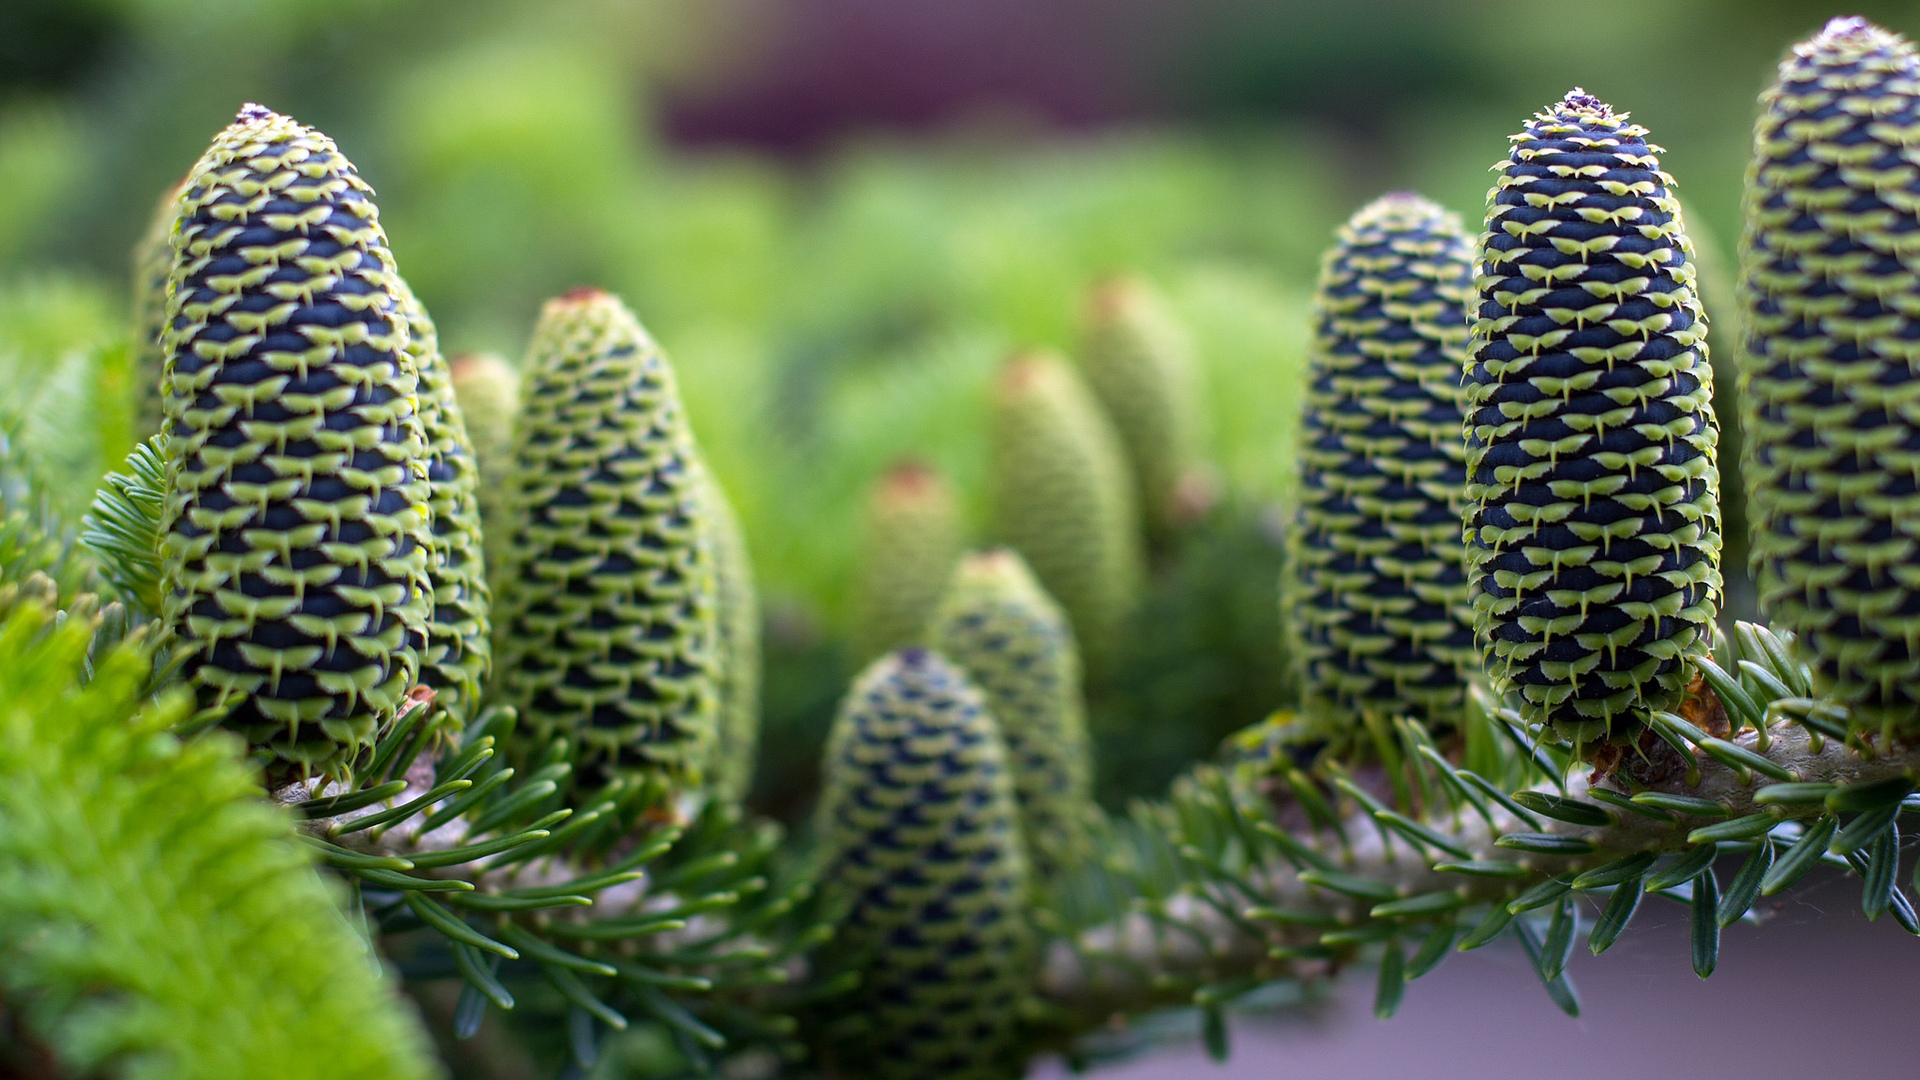 Green Pine Cones for 1920 x 1080 HDTV 1080p resolution